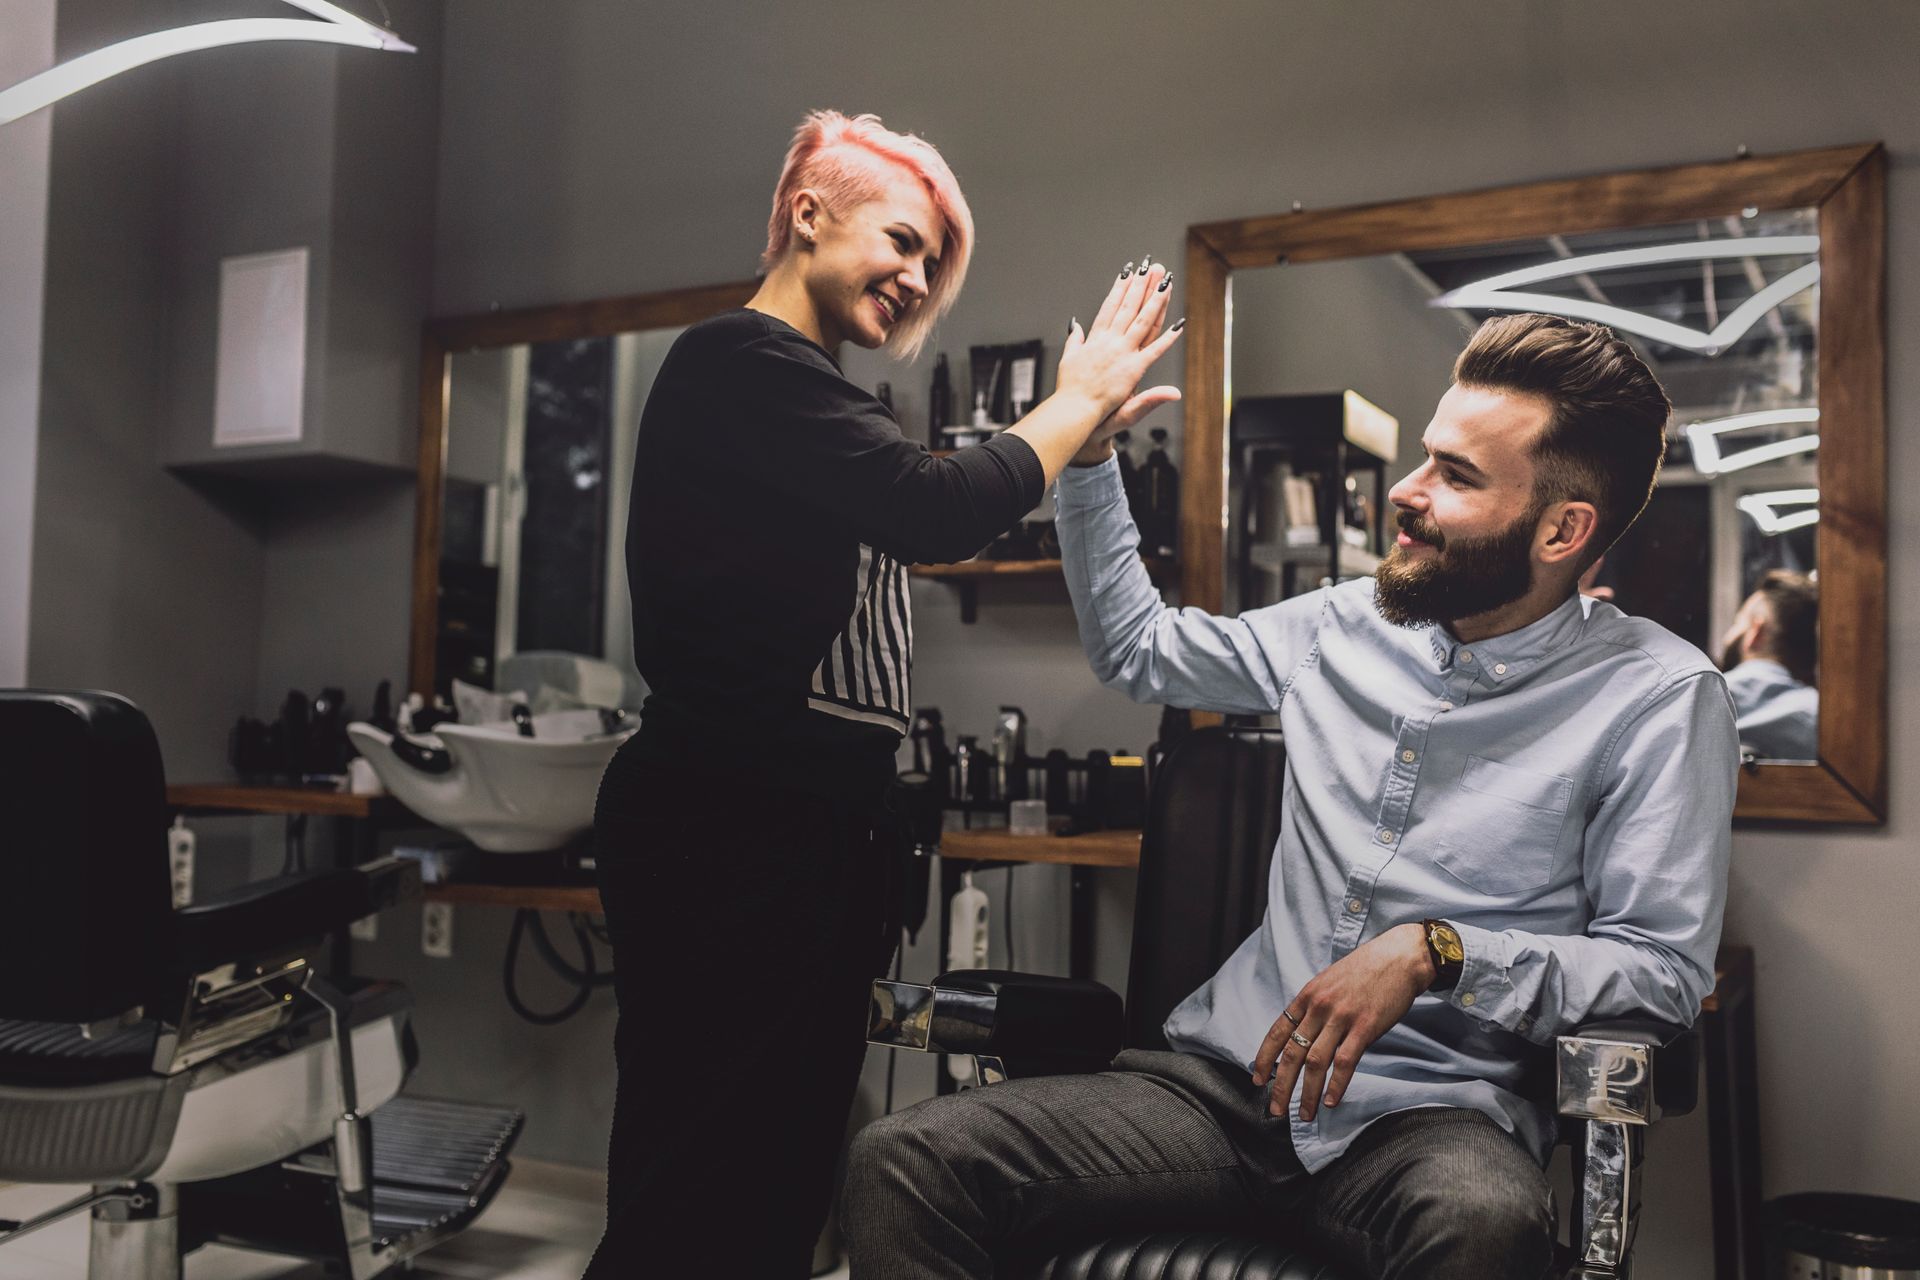 A woman is giving a man a high five in a barber shop.